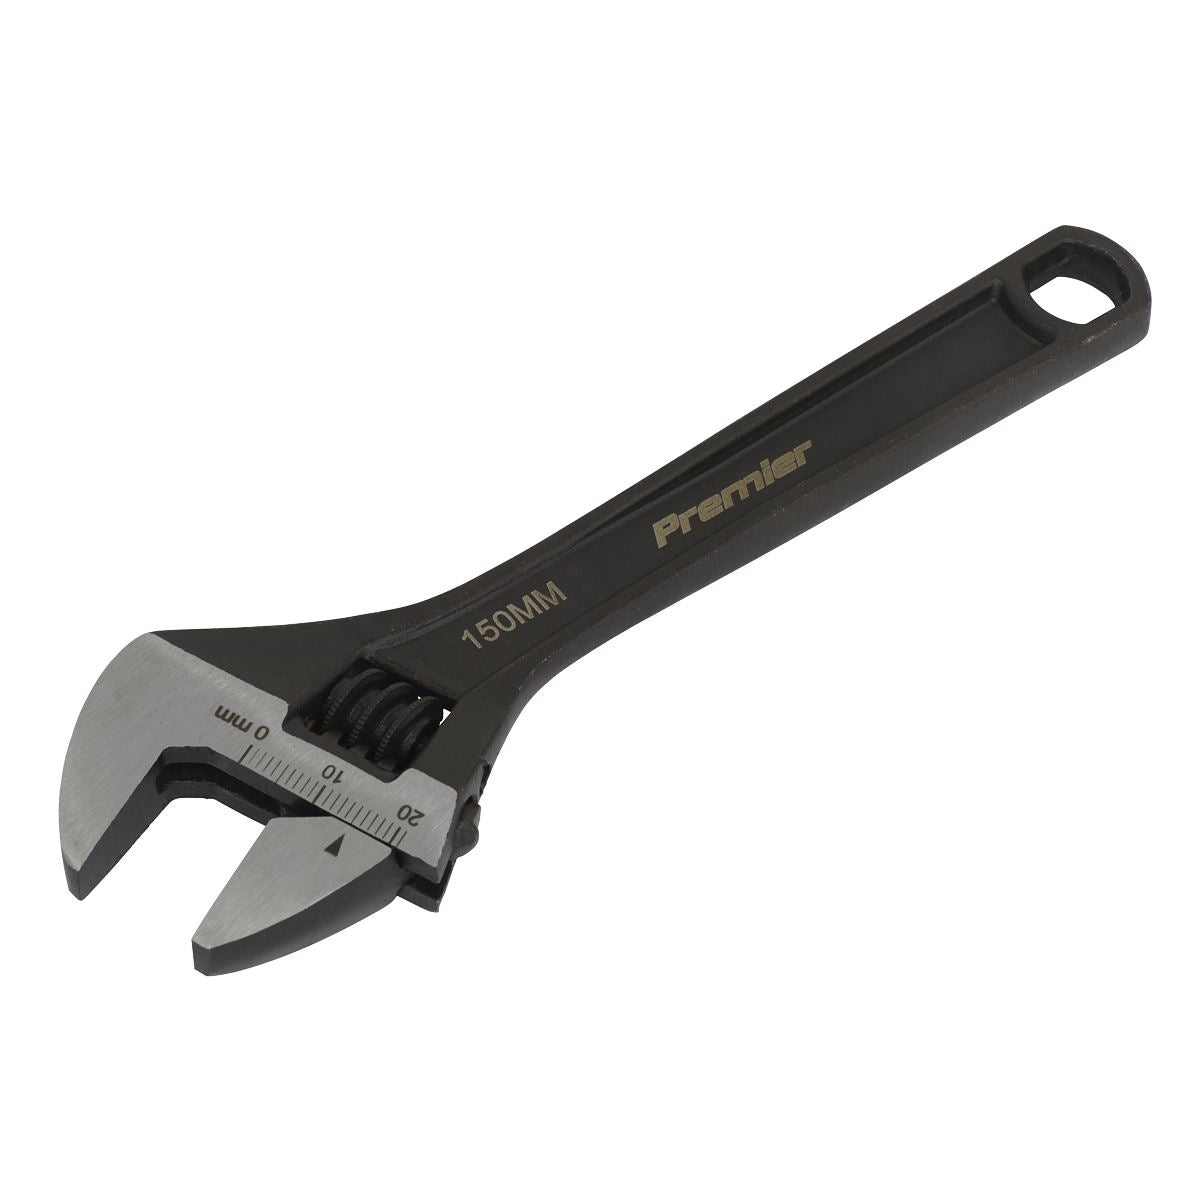 Sealey Premier Adjustable Wrench 150mm Jaw Capacity 19mm